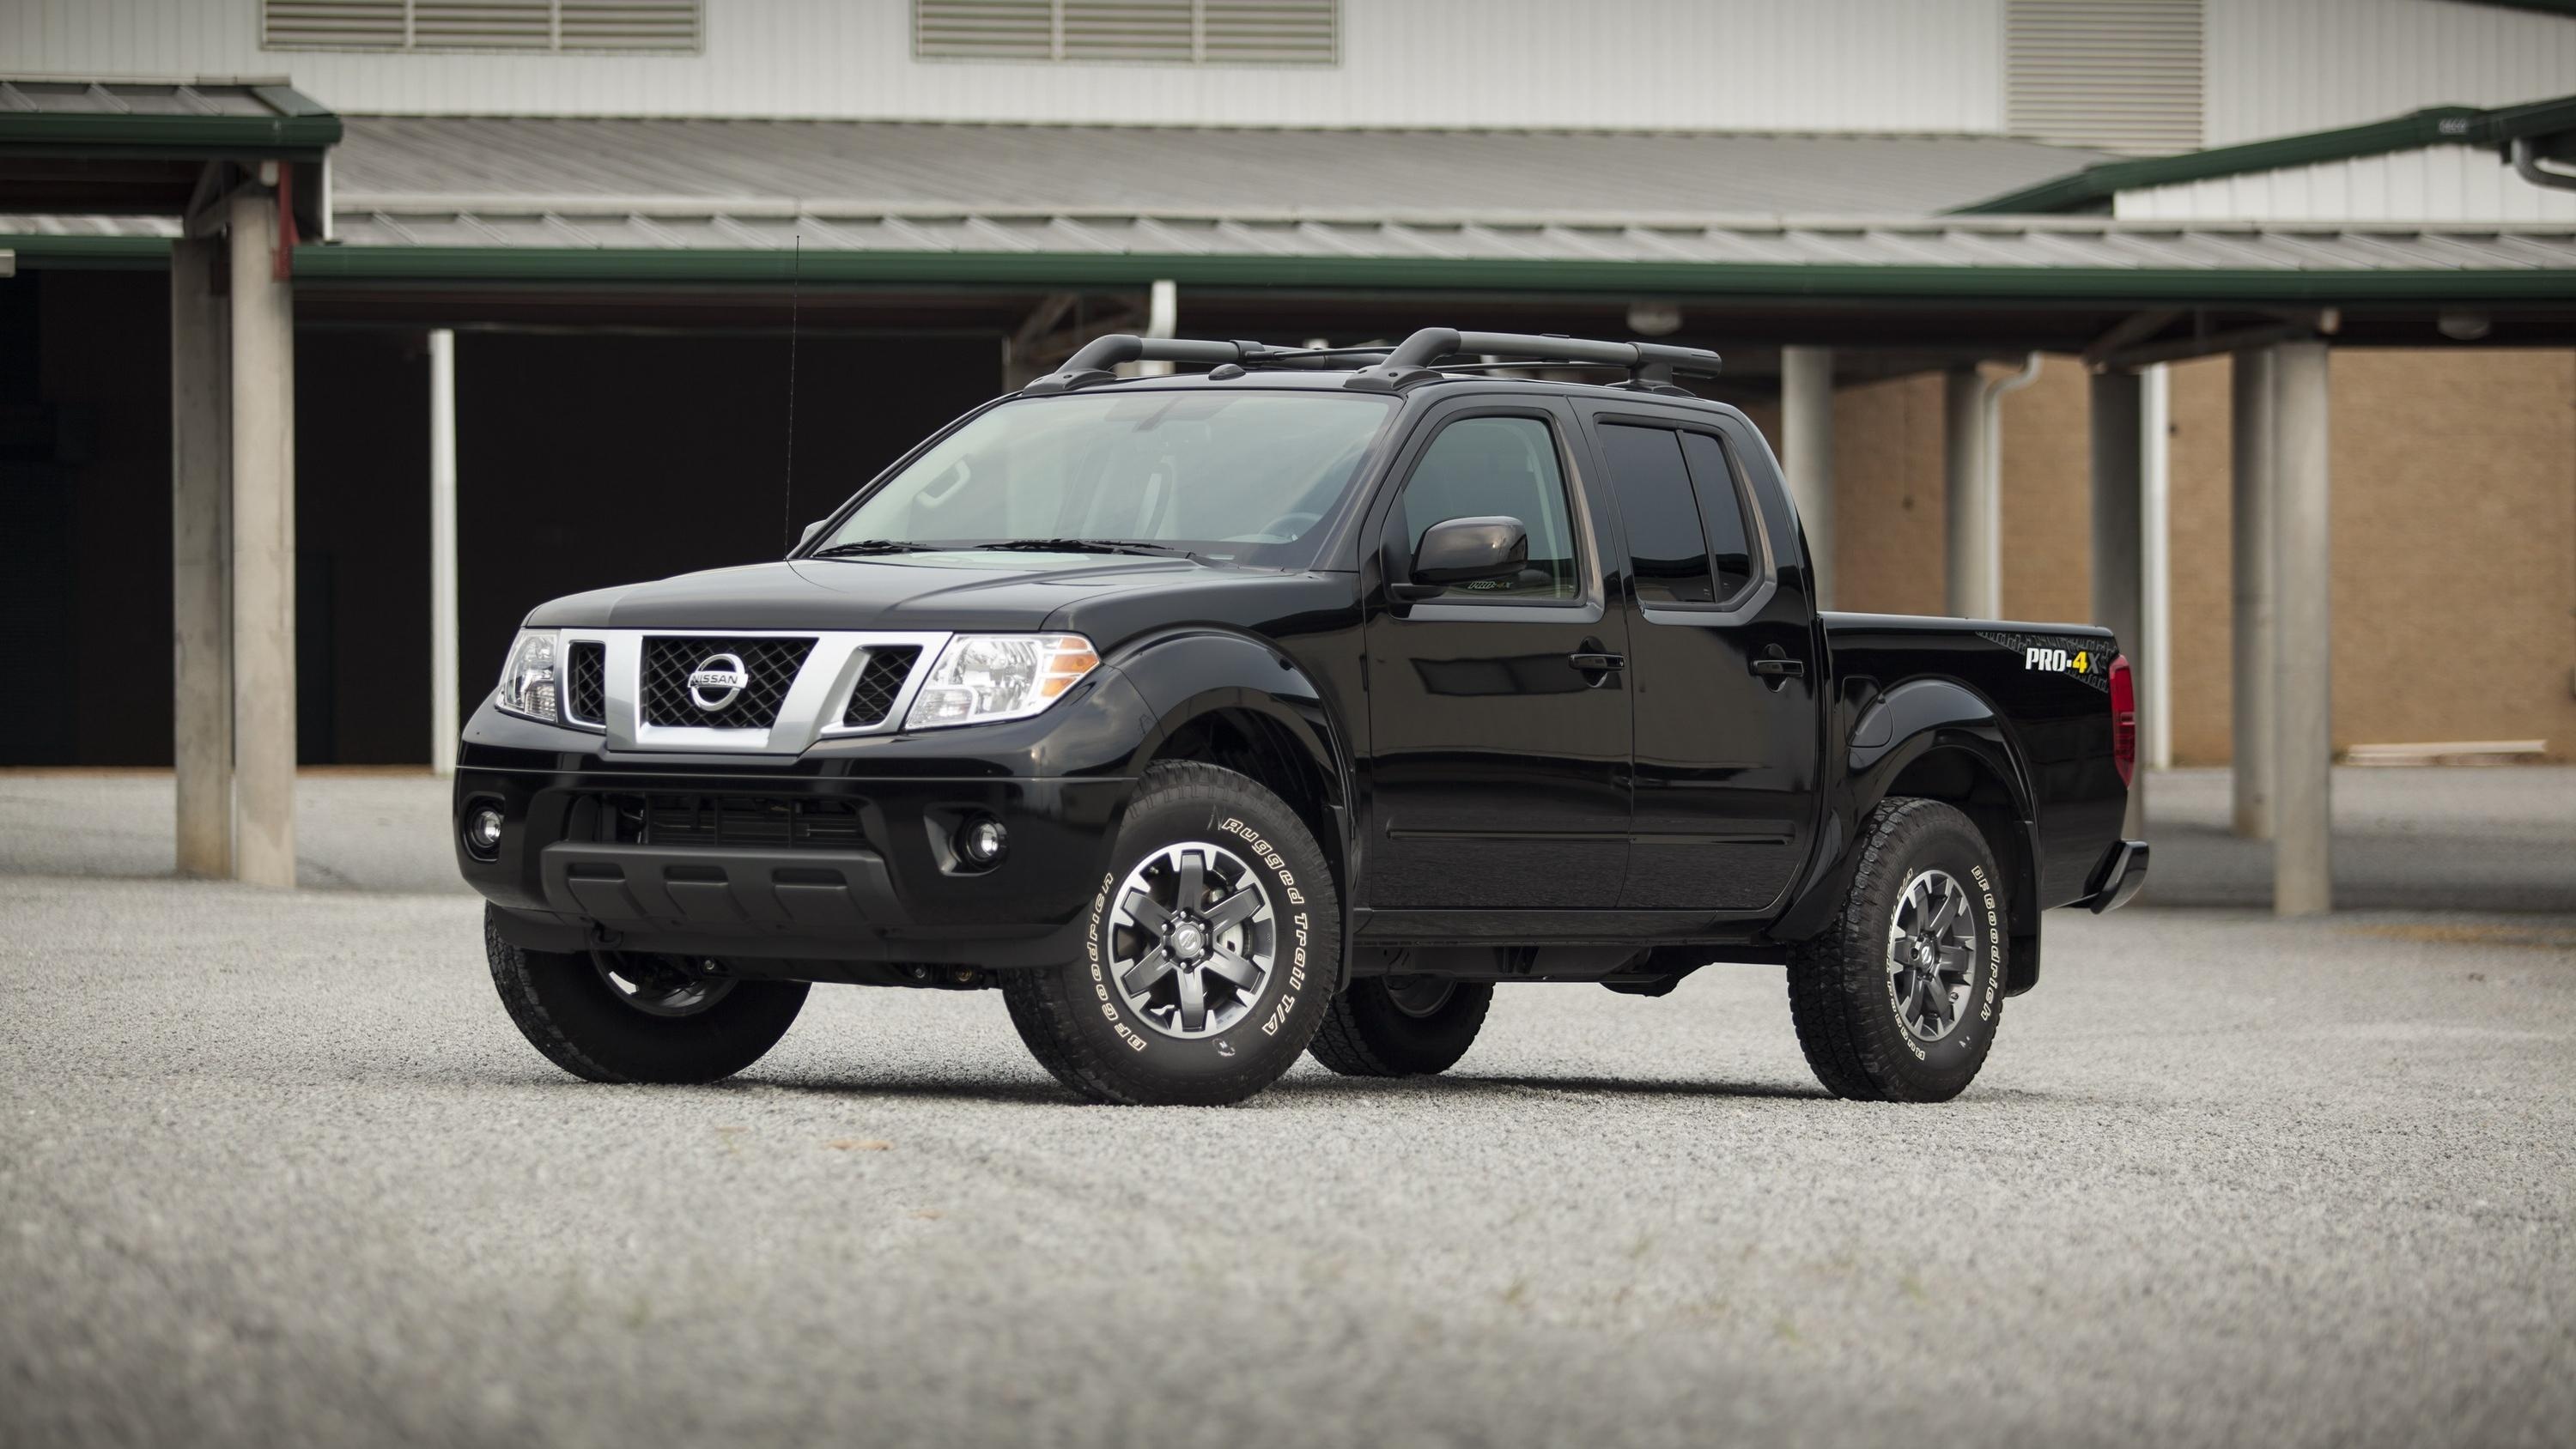 Nissan Frontier, High-quality wallpapers, Top-rated backgrounds, Automotive enthusiasts, 3000x1690 HD Desktop